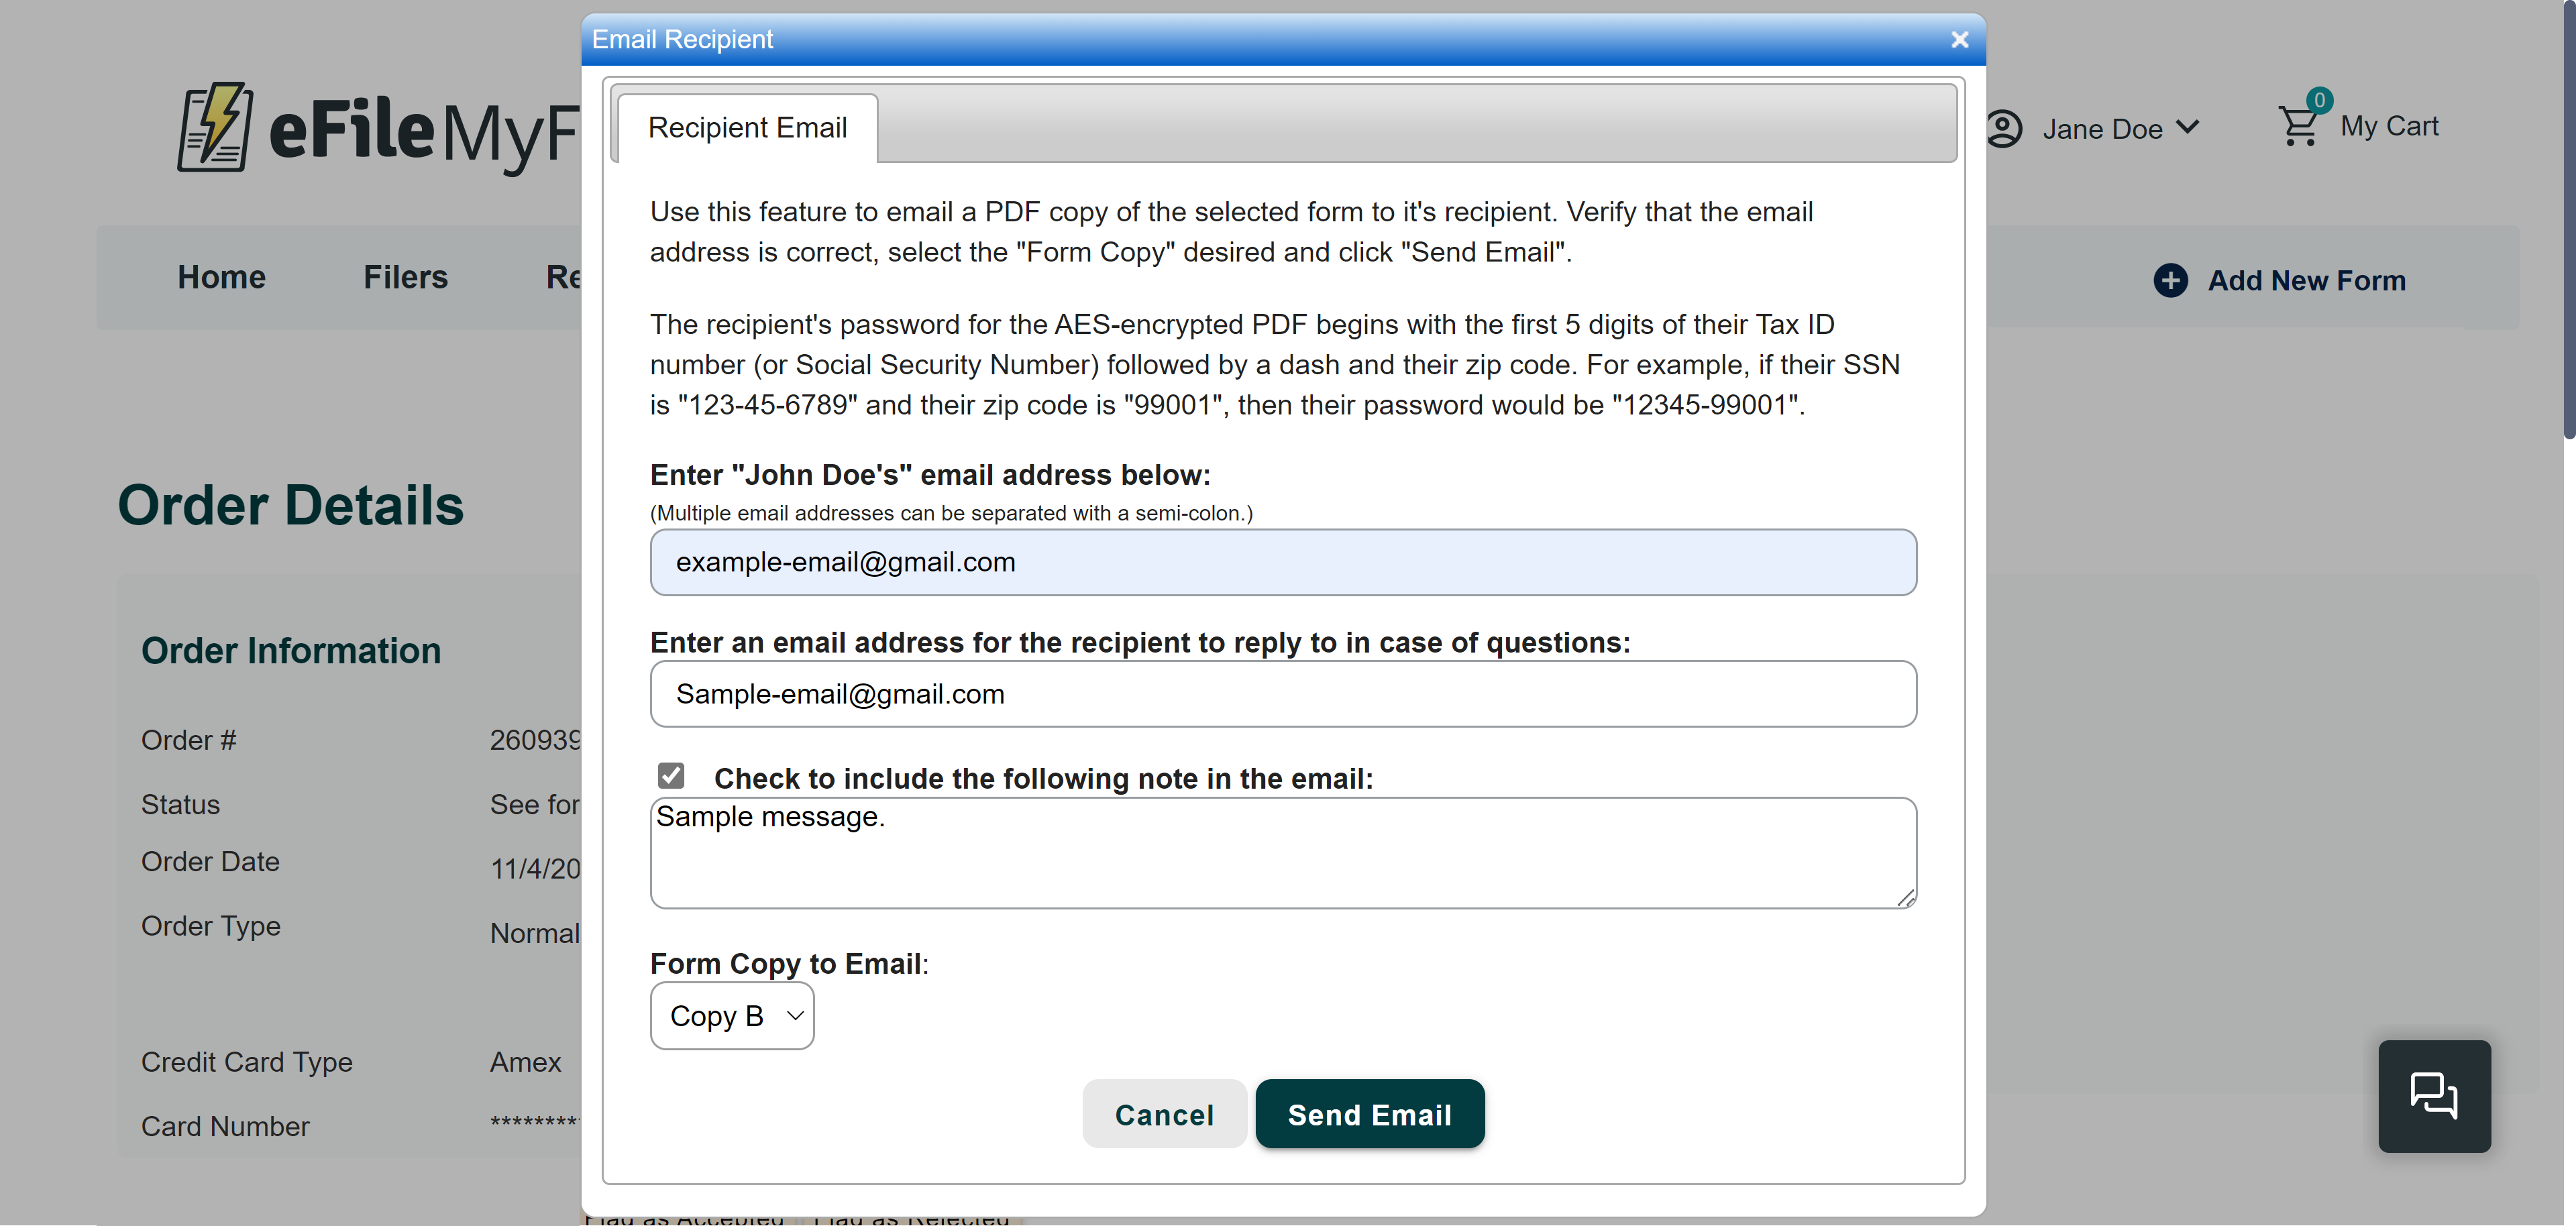 Image of the Email Recipient window.